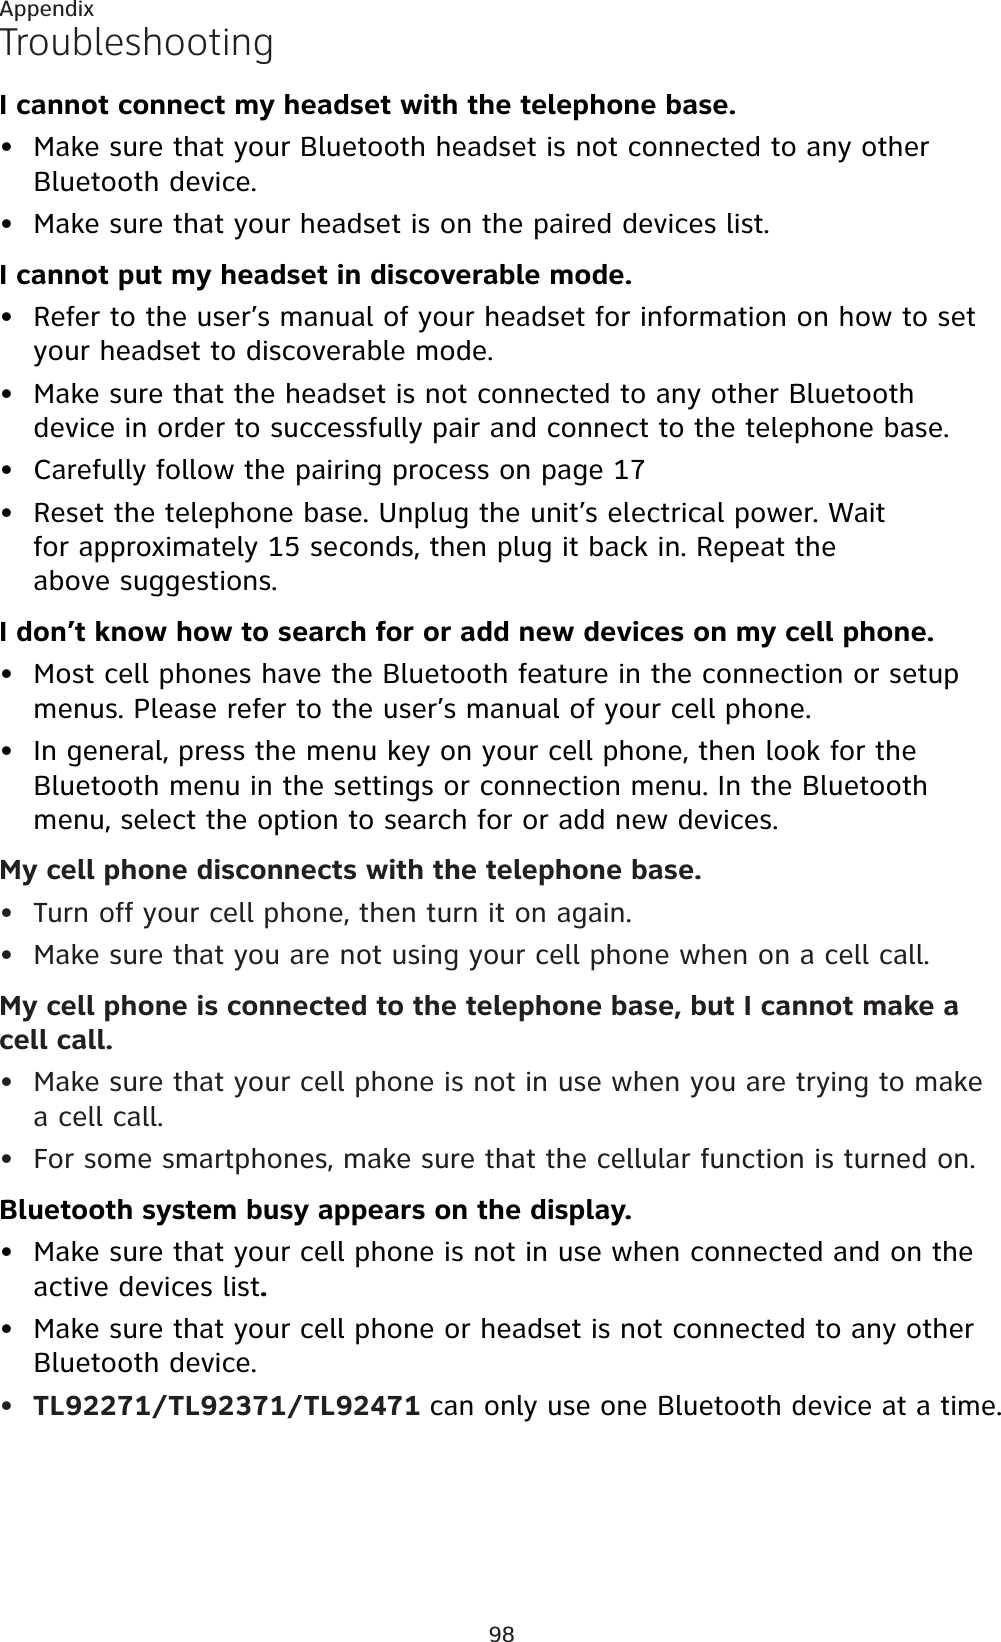 98AppendixTroubleshootingI cannot connect my headset with the telephone base.Make sure that your Bluetooth headset is not connected to any other Bluetooth device.Make sure that your headset is on the paired devices list.I cannot put my headset in discoverable mode.Refer to the user’s manual of your headset for information on how to set your headset to discoverable mode.Make sure that the headset is not connected to any other Bluetooth device in order to successfully pair and connect to the telephone base.Carefully follow the pairing process on page 17Reset the telephone base. Unplug the unit’s electrical power. Wait for approximately 15 seconds, then plug it back in. Repeat the above suggestions.I don’t know how to search for or add new devices on my cell phone.Most cell phones have the Bluetooth feature in the connection or setup menus. Please refer to the user’s manual of your cell phone.In general, press the menu key on your cell phone, then look for the Bluetooth menu in the settings or connection menu. In the Bluetooth menu, select the option to search for or add new devices.My cell phone disconnects with the telephone base.Turn off your cell phone, then turn it on again.Make sure that you are not using your cell phone when on a cell call.My cell phone is connected to the telephone base, but I cannot make a cell call.Make sure that your cell phone is not in use when you are trying to make a cell call.For some smartphones, make sure that the cellular function is turned on.Bluetooth system busy appears on the display.Make sure that your cell phone is not in use when connected and on the active devices list.Make sure that your cell phone or headset is not connected to any other Bluetooth device.TL92271/TL92371/TL92471 can only use one Bluetooth device at a time.•••••••••••••••